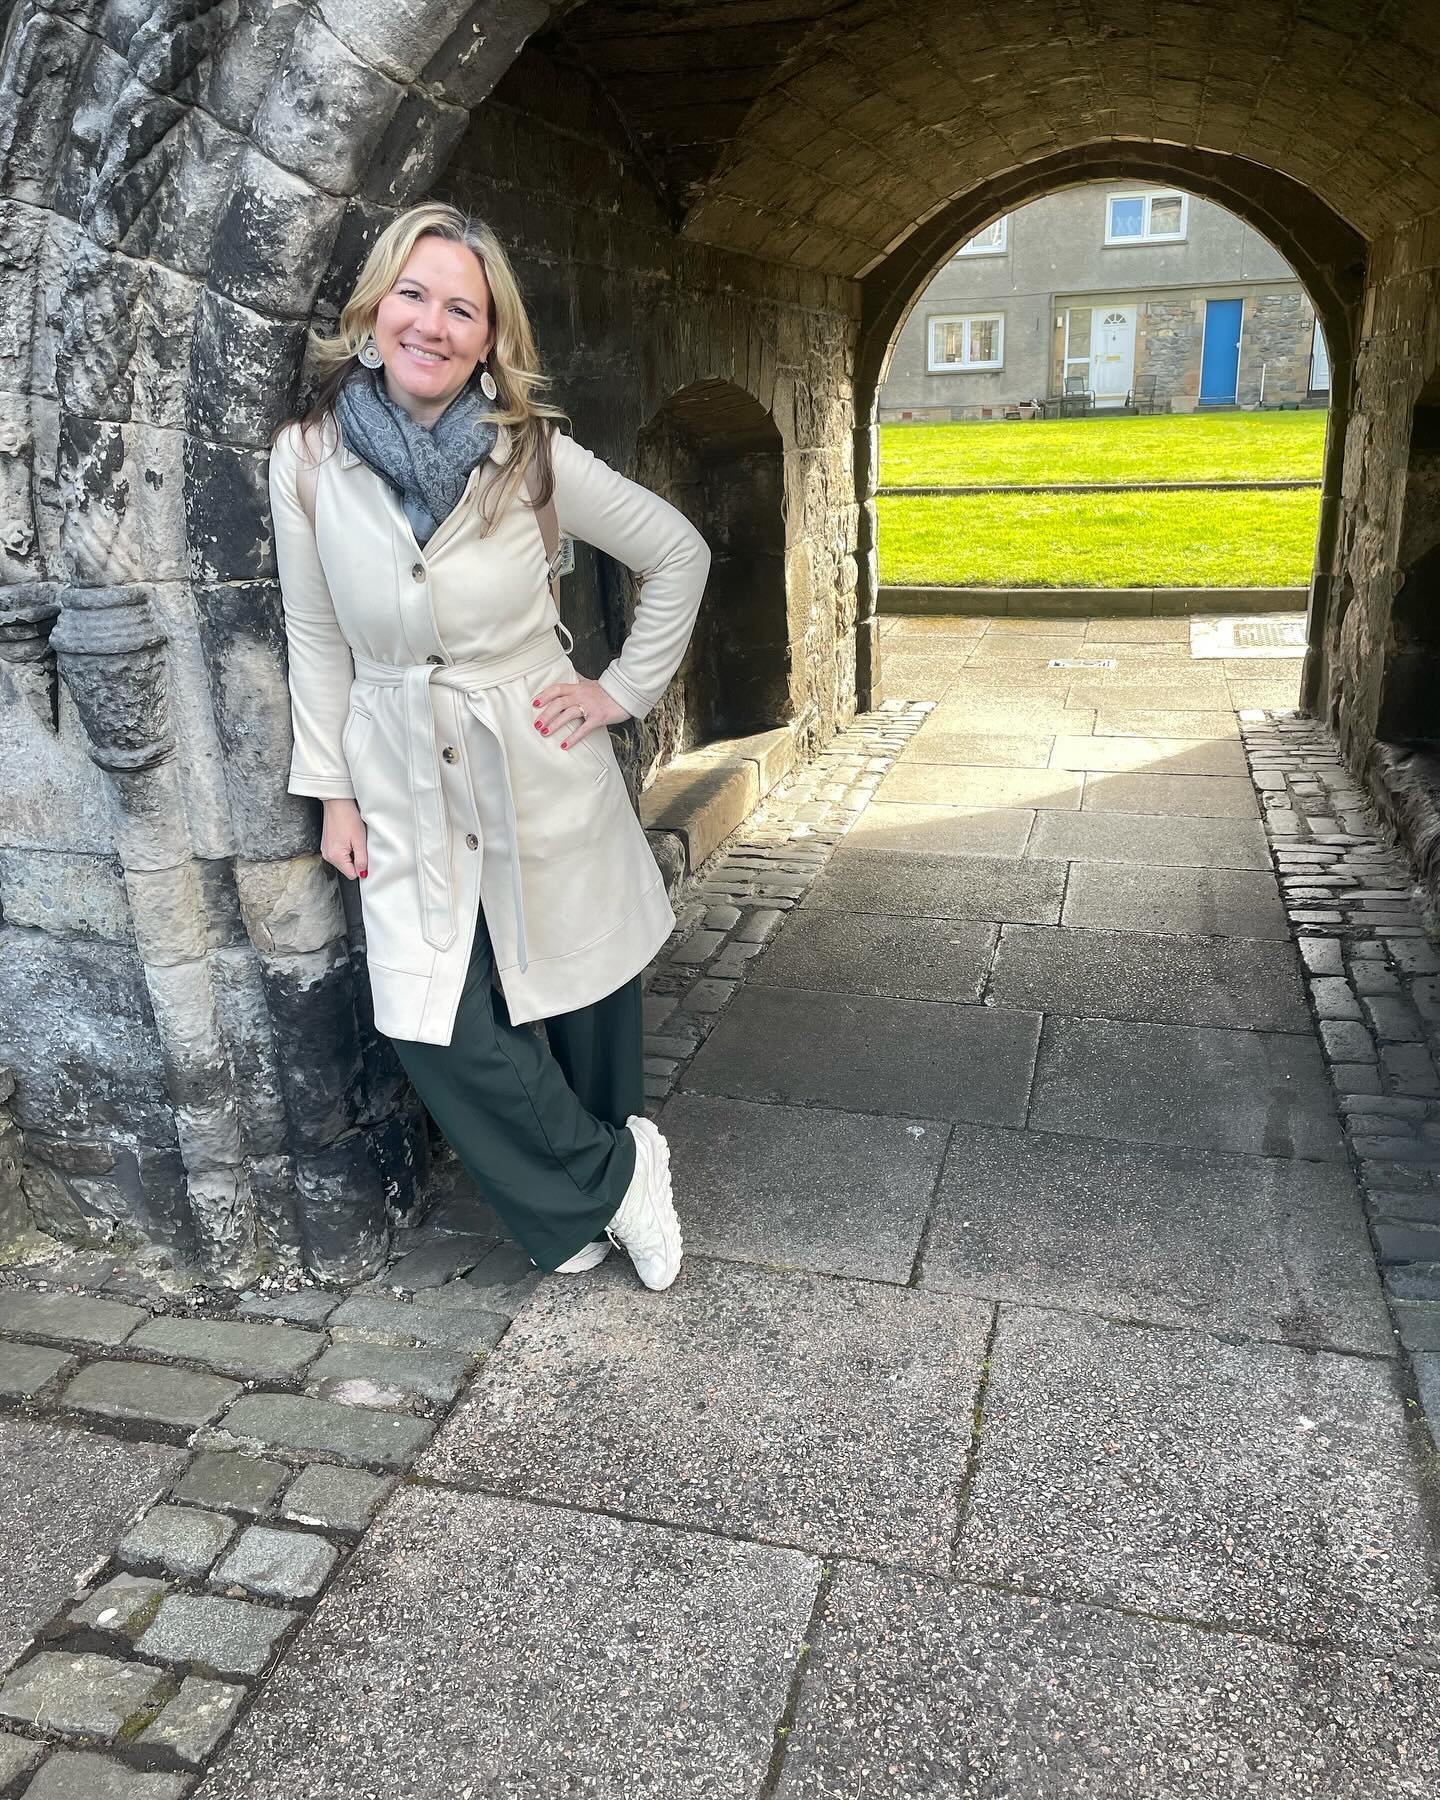 🏞️ Last Saturday was a journey through time and history as Mom and I embarked on a road trip through Scotland! 🚗 

From the picturesque Menstrie Castle, tracing the footsteps of our ancestor&rsquo;s birthplace, to the solemn tranquility of where he